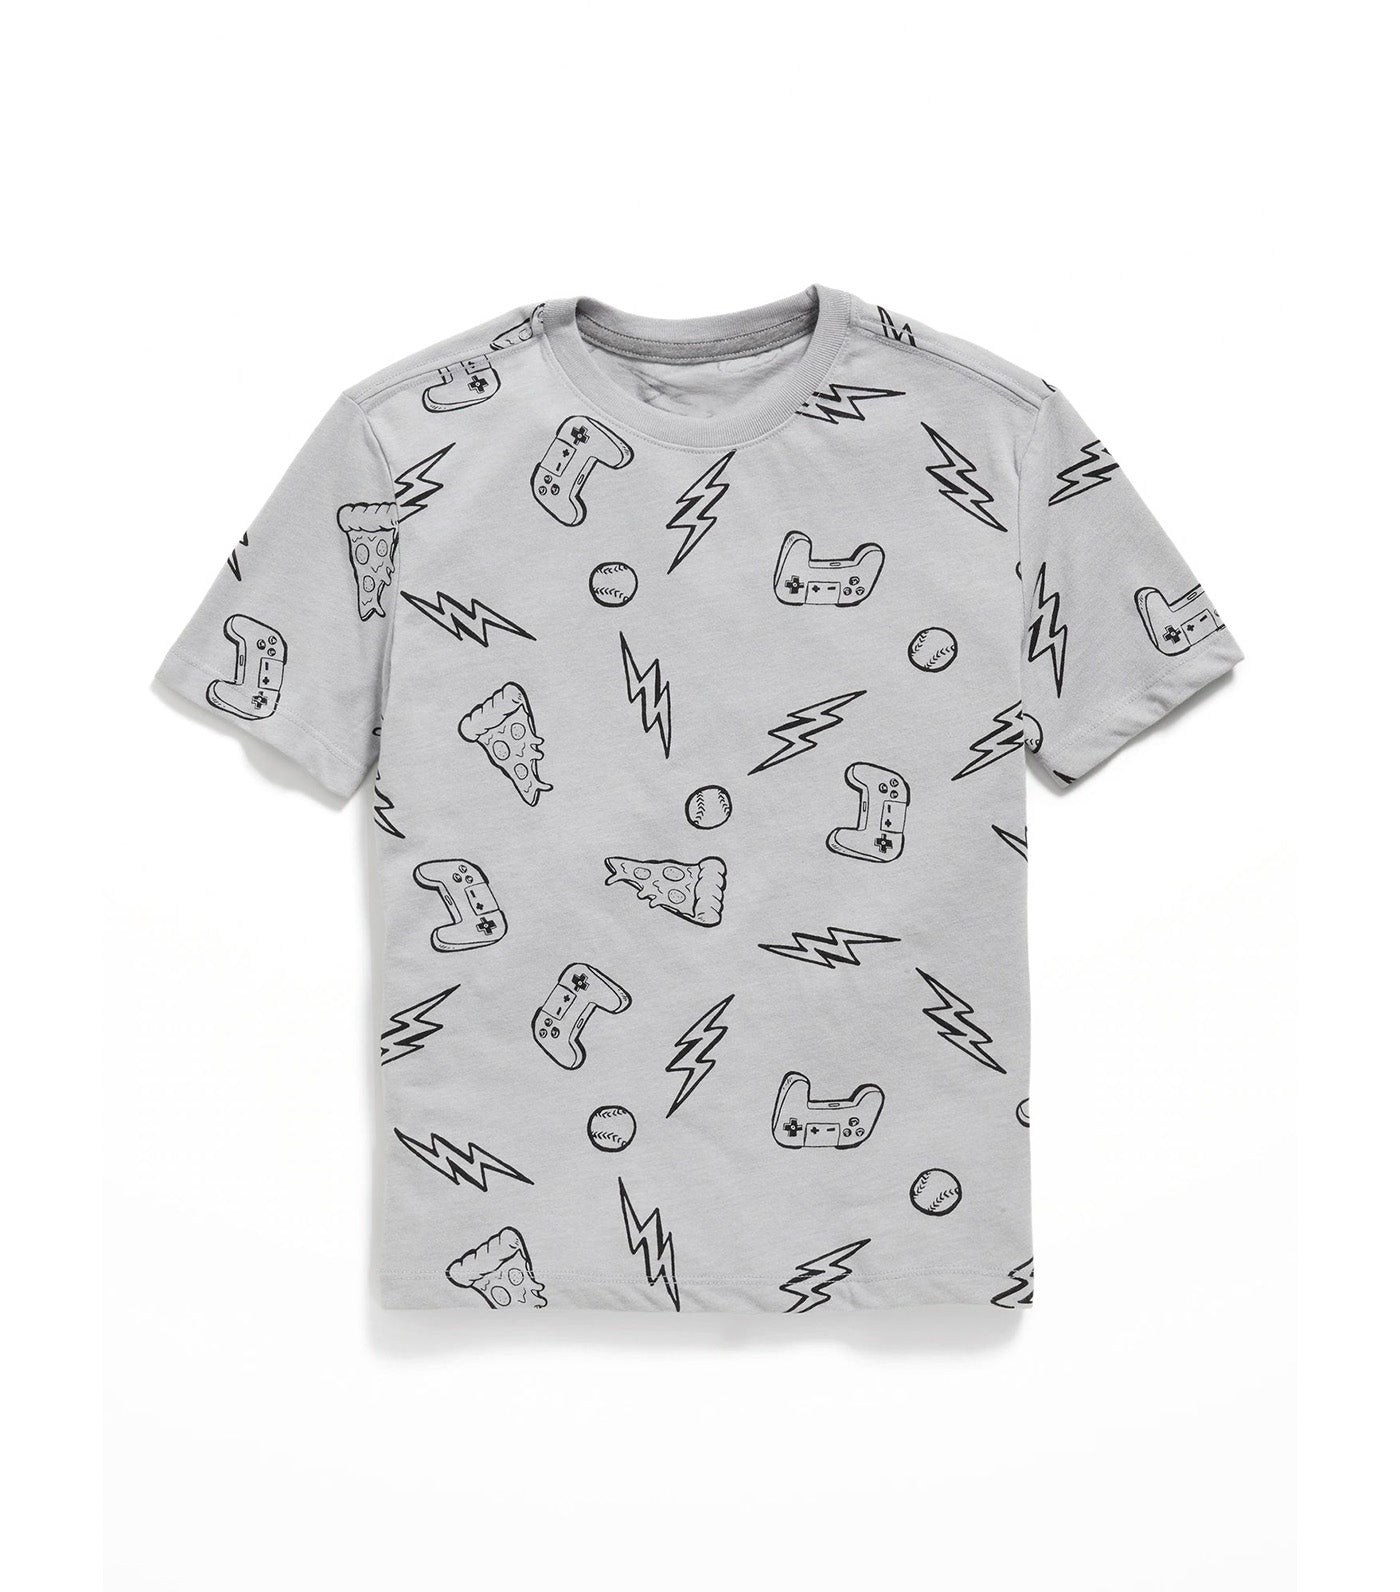 Softest Printed Crew-Neck T-Shirt for Boys - Wii-Game Party